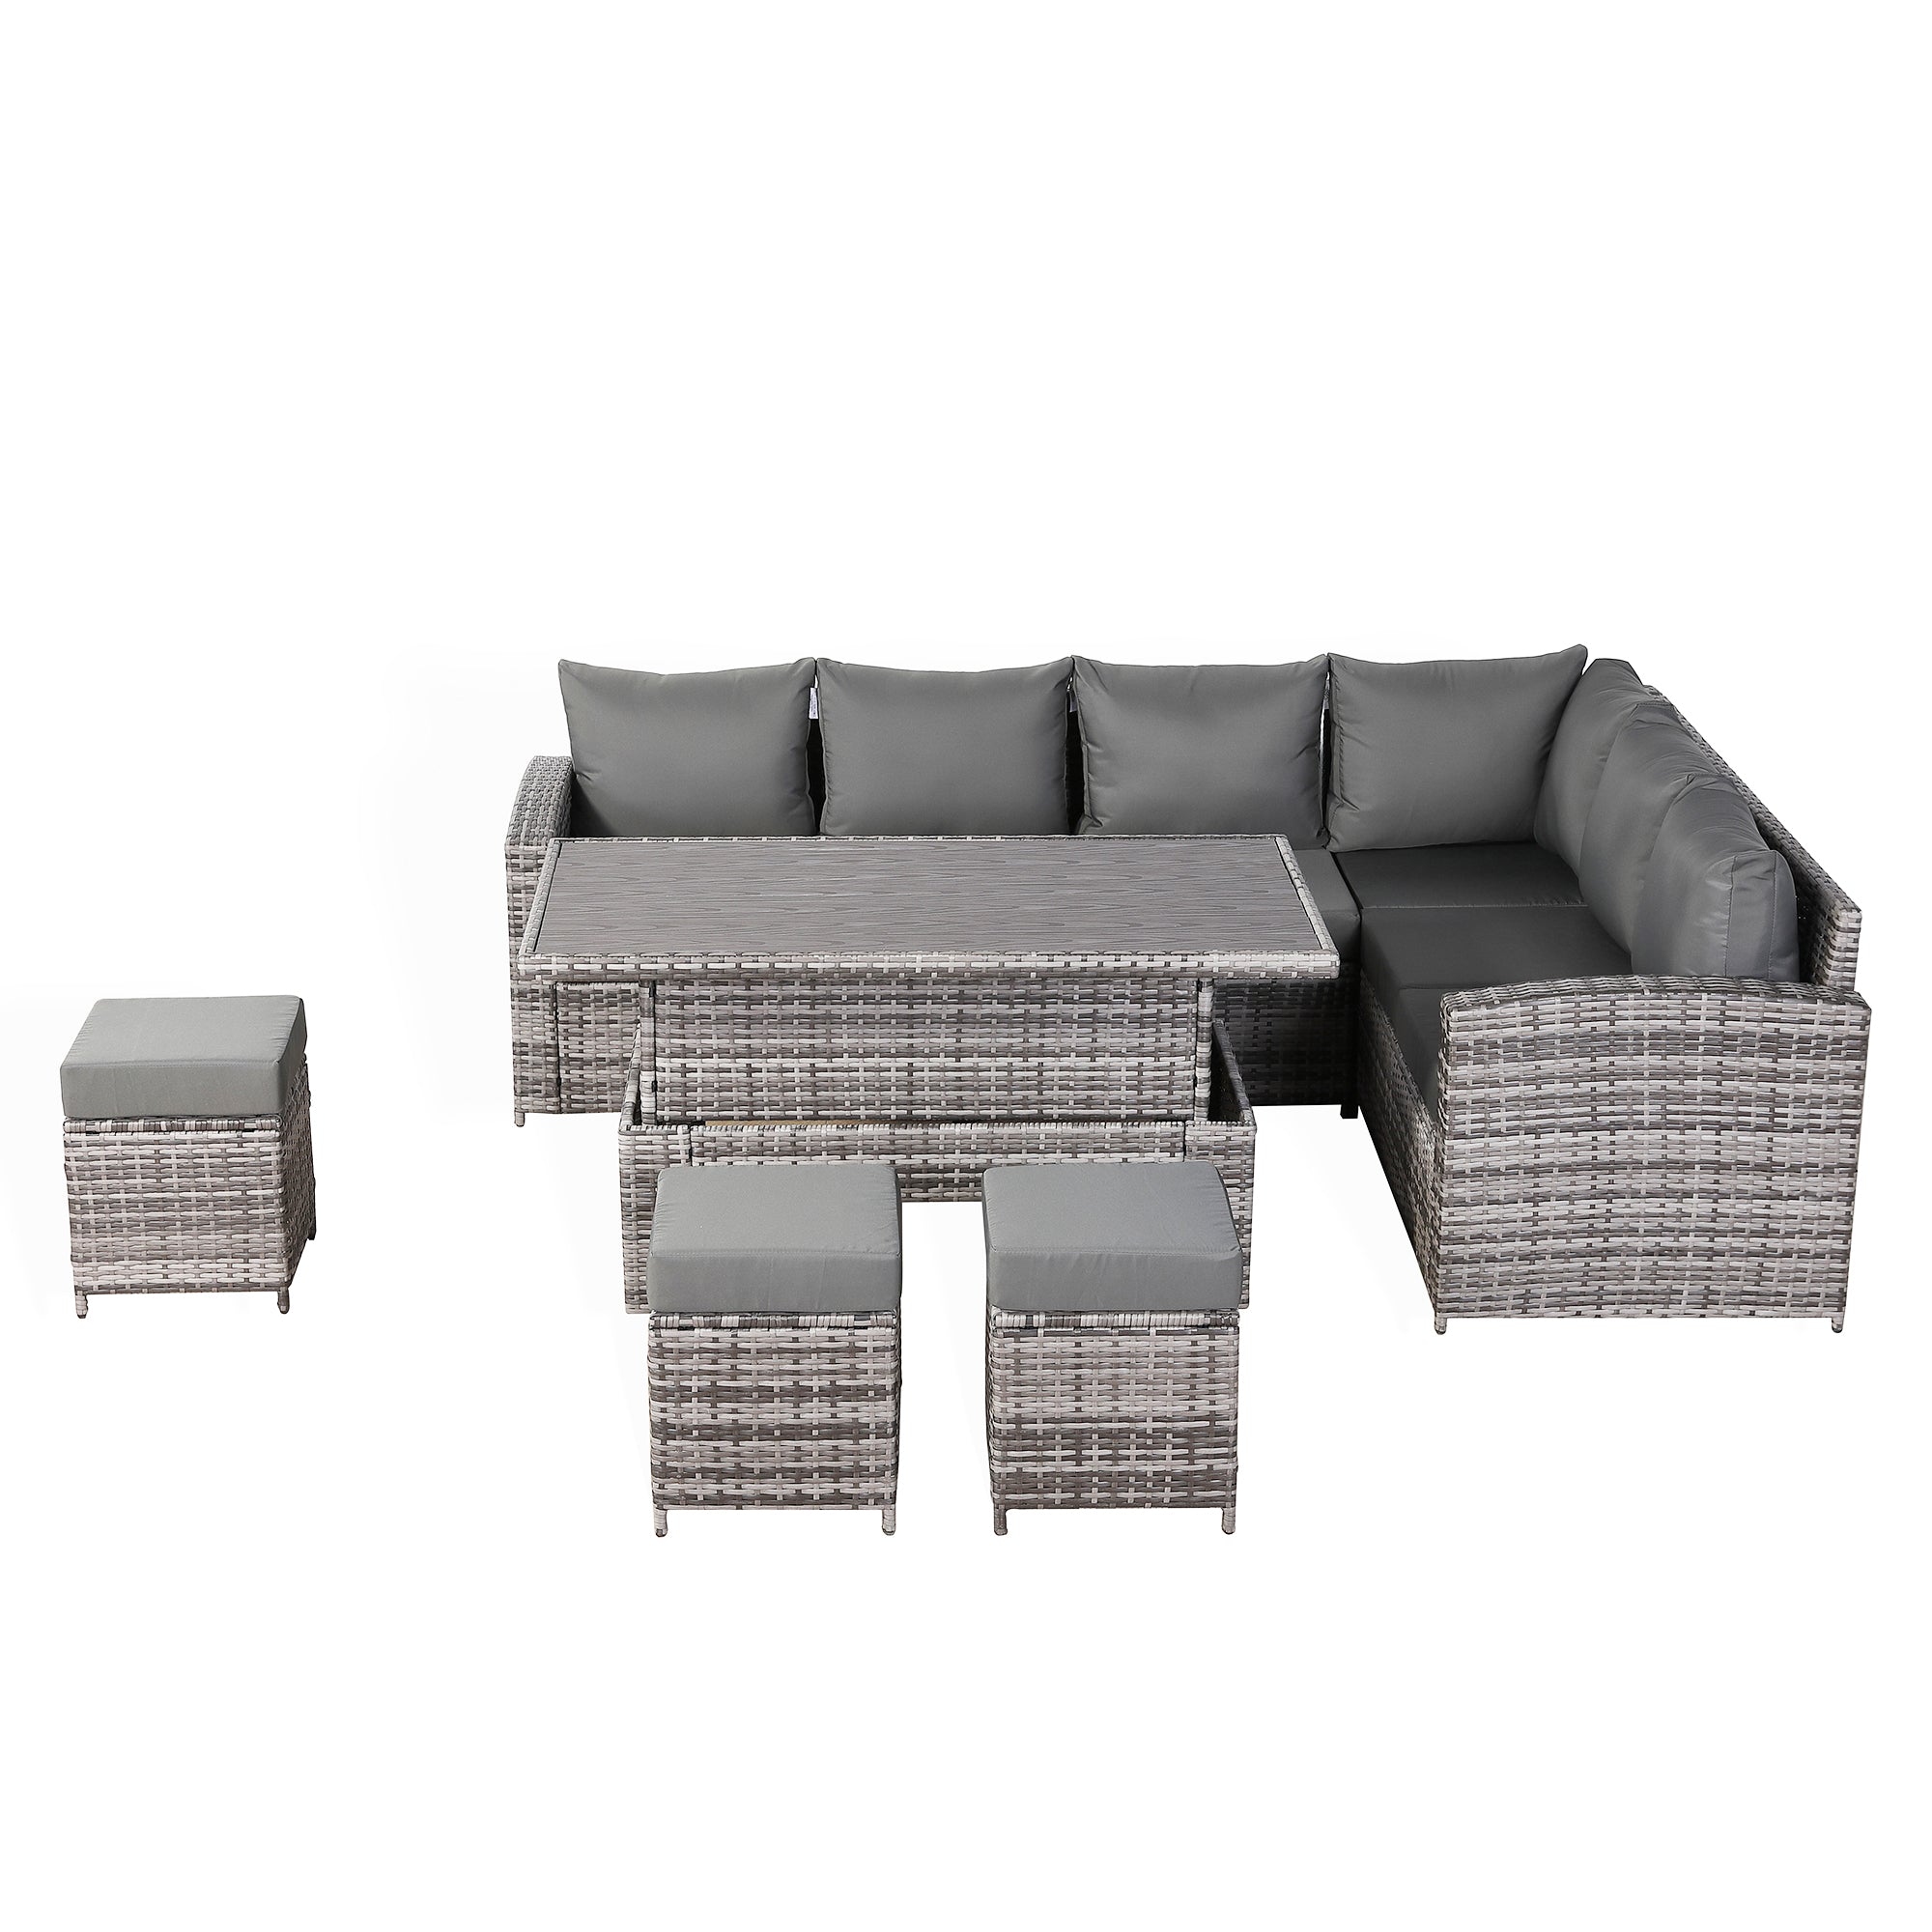 Henley Range High Back RHF Dining Corner Sofa Set in Grey Weave with Rising Table